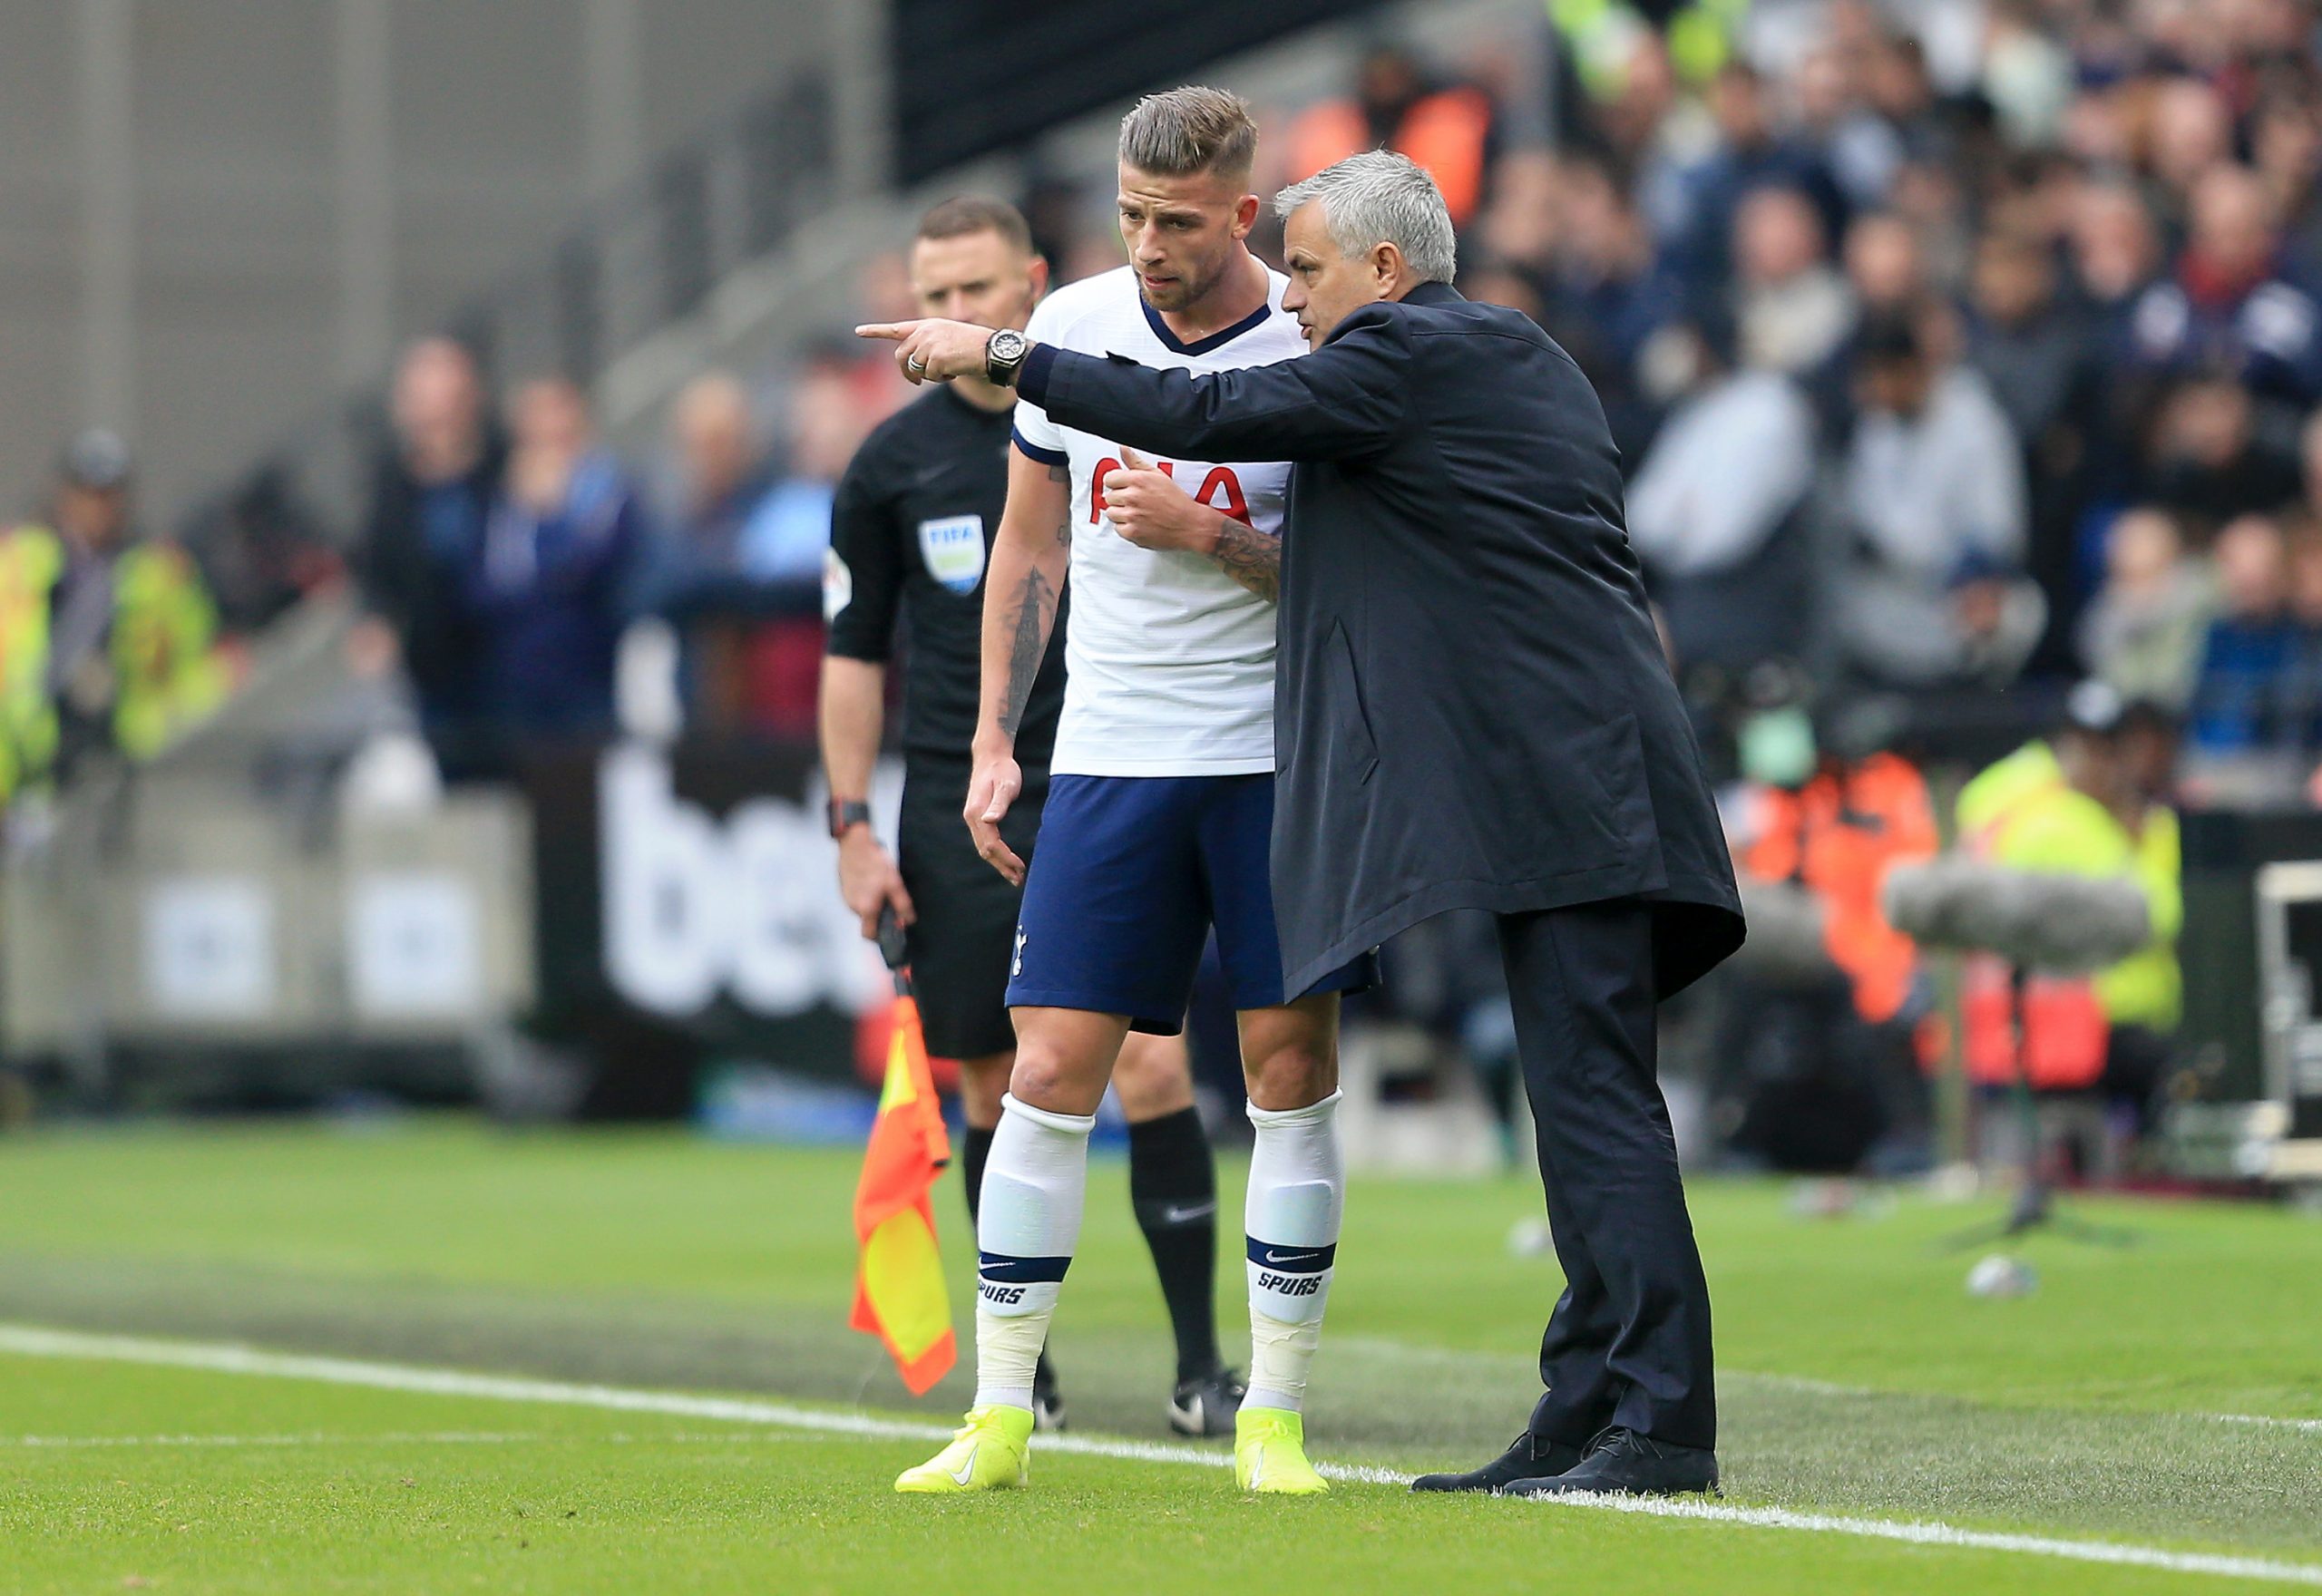 LONDON, ENGLAND - NOVEMBER 23: Jose Mourinho, Manager of Tottenham Hotspur gives instructions to Toby Alderweireld of Tottenham Hotspur  during the Premier League match between West Ham United and Tottenham Hotspur at London Stadium on November 23, 2019 in London, United Kingdom. (Photo by Stephen Pond/Getty Images)